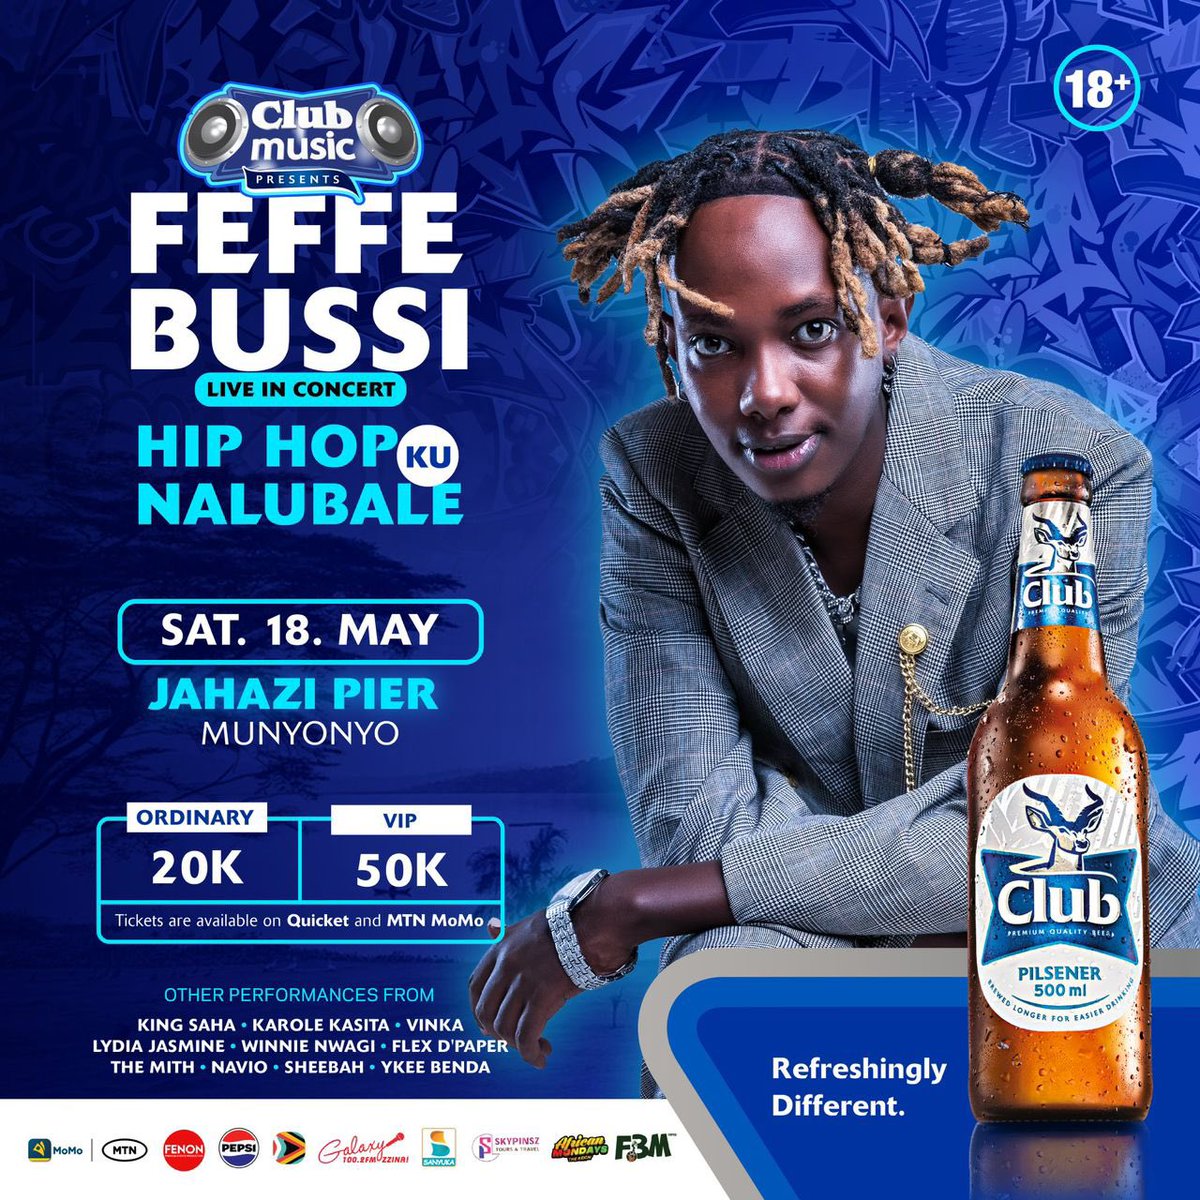 .@FeffebussiMusic Live in Concert • HipHop Ku Nalubale at Jahazi Pier Munyonyo. HipHop Lyrical Maestro brings the energy and thrill to the mic tonight. This is your sign to be there.